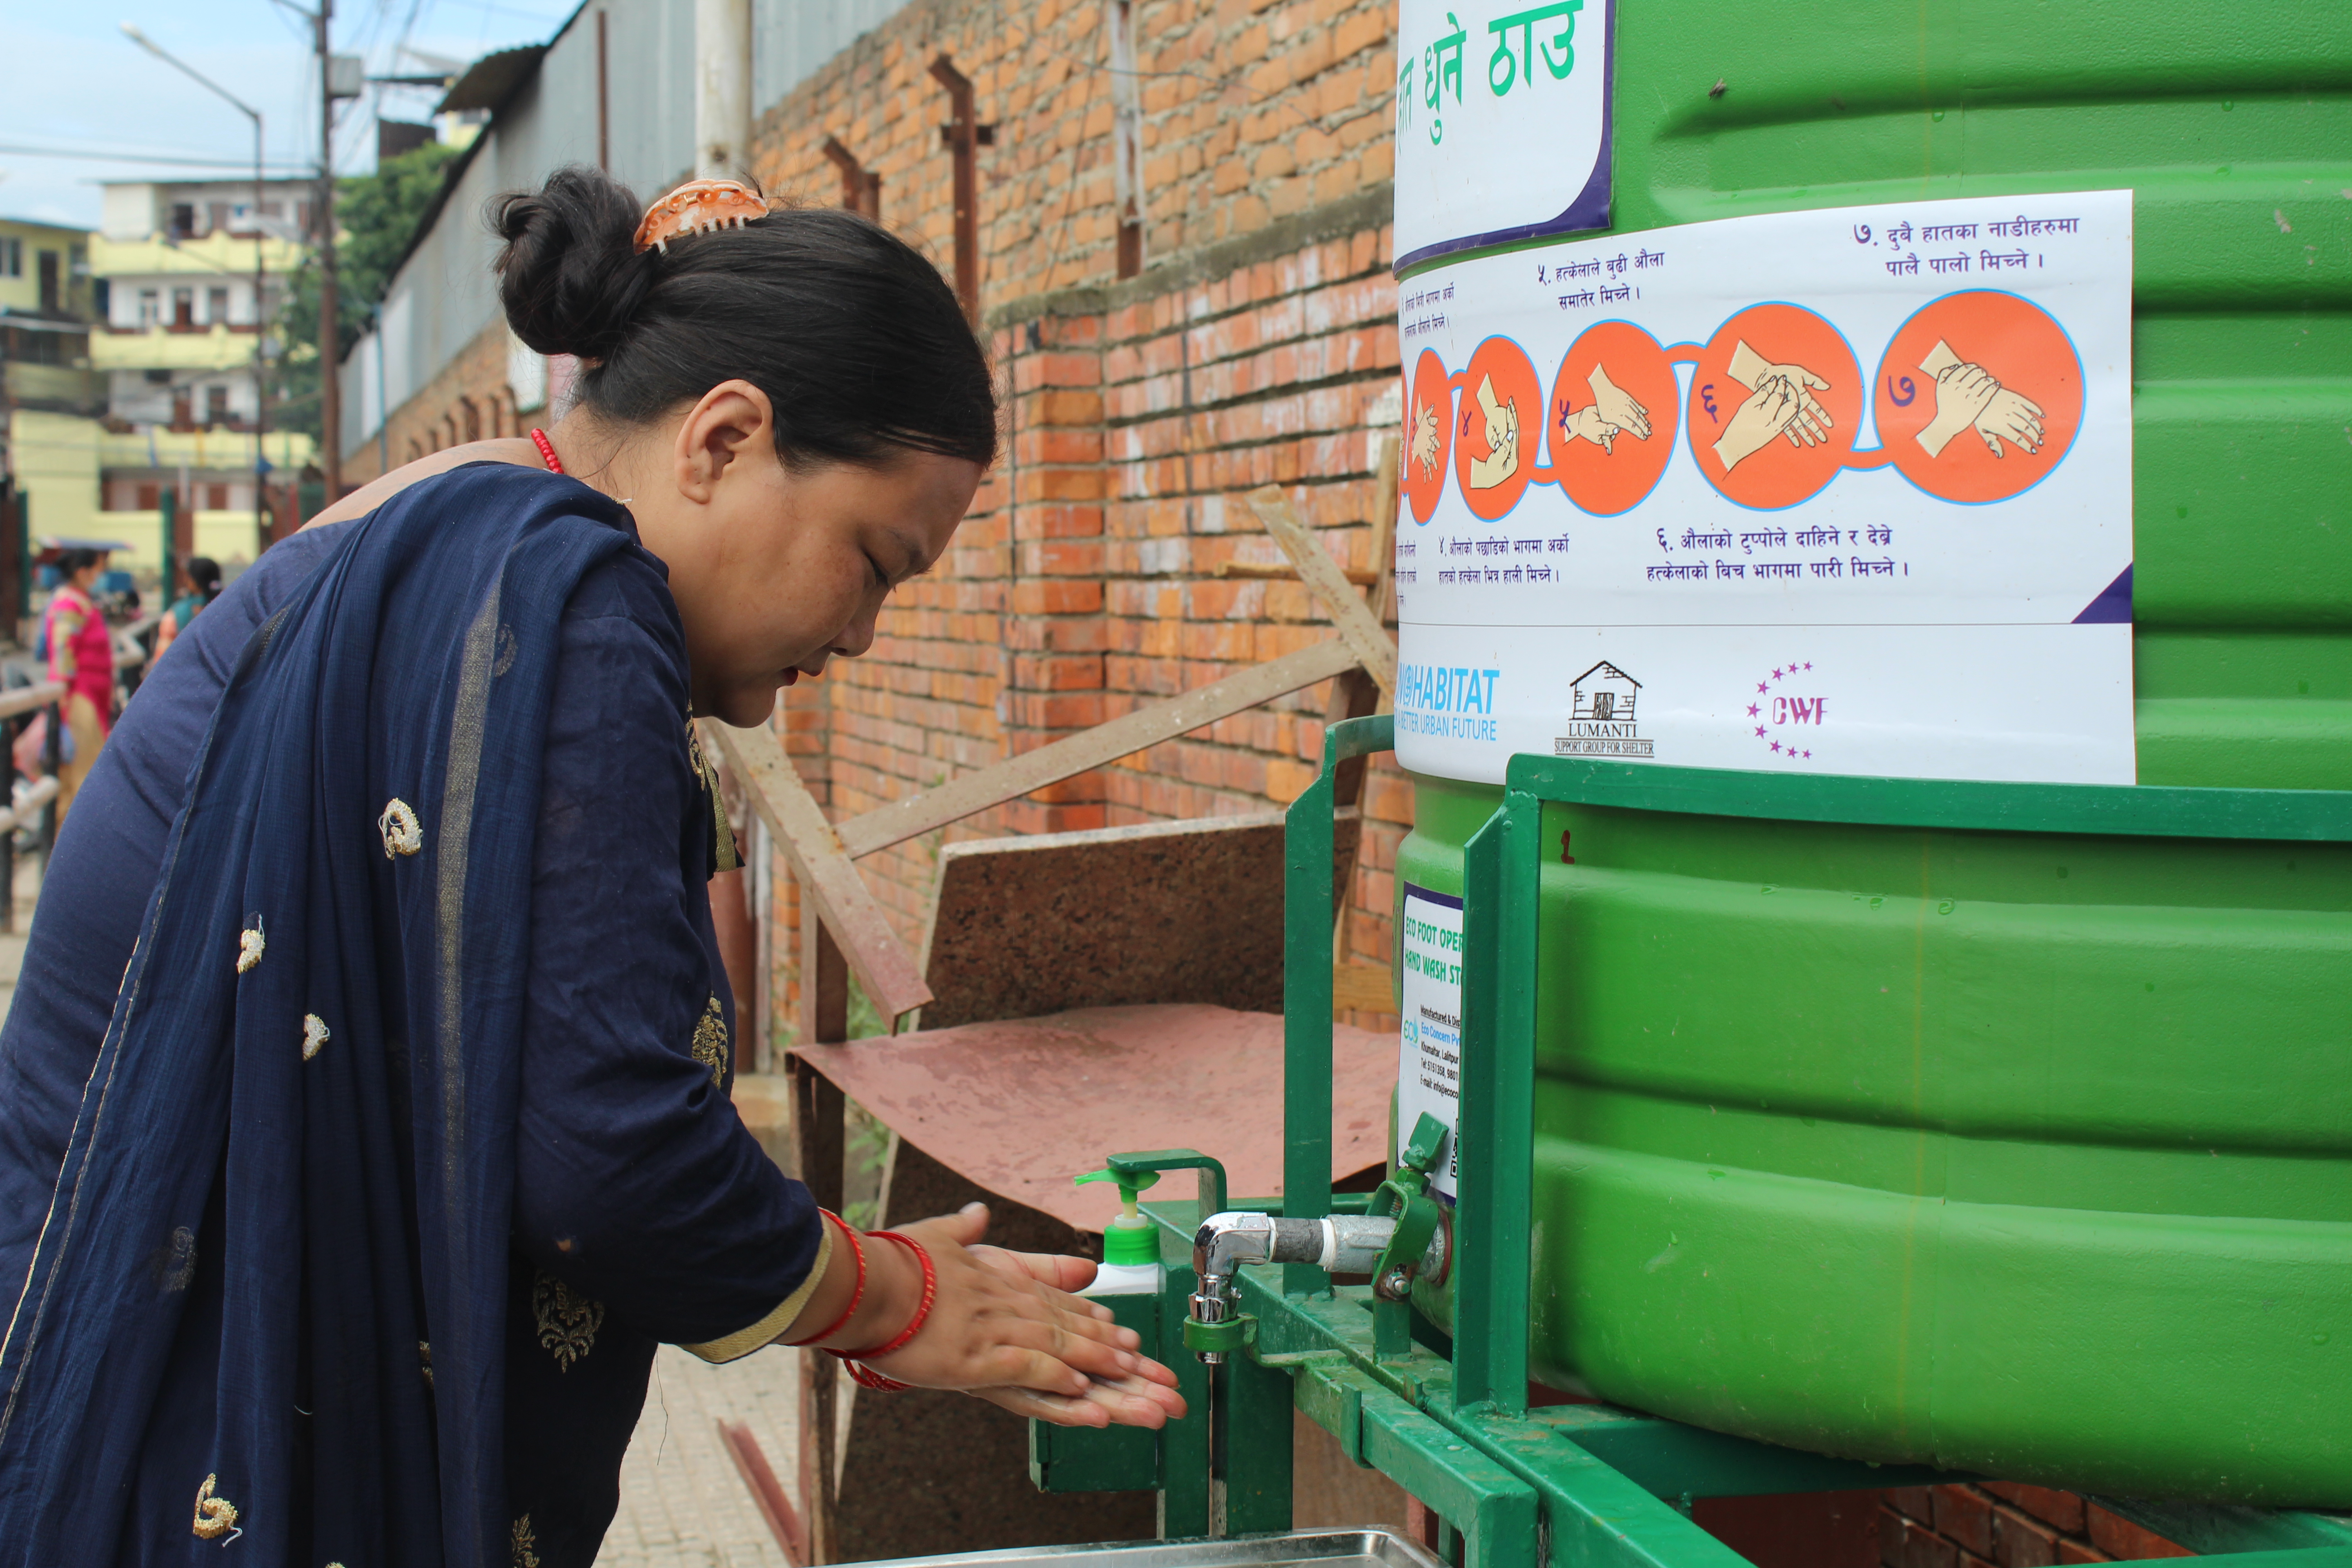 A newly installed touchless handwashing facility by UN-Habitat aims to prevent the spread of COVID-19 in Kalimati Vegetable Market in Kathmandu, Nepal